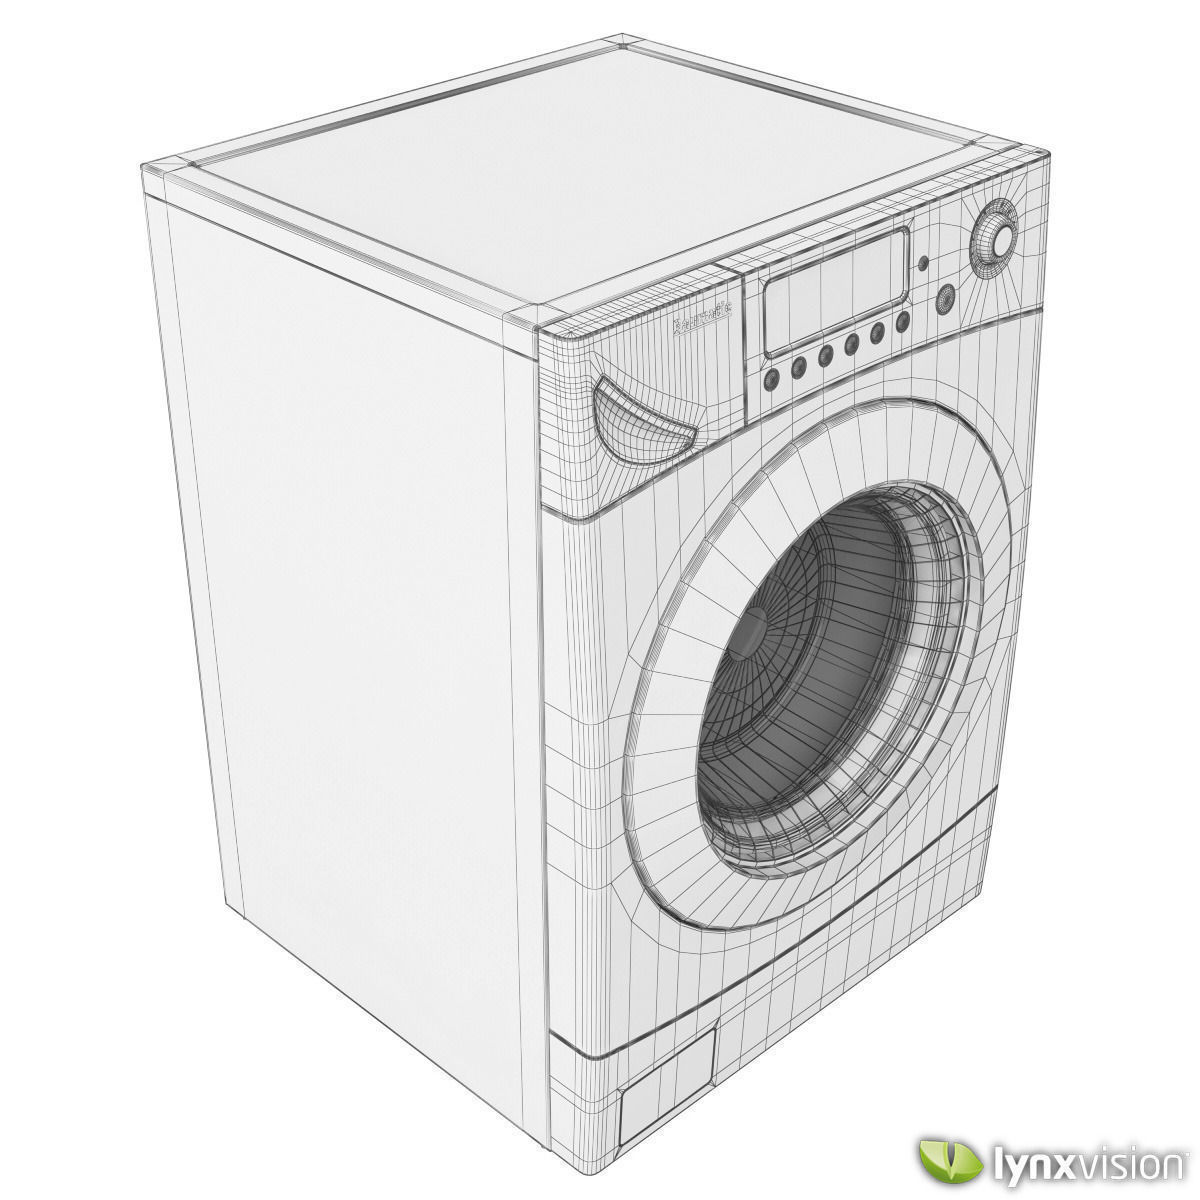 Washing Machine Sketch at Explore collection of